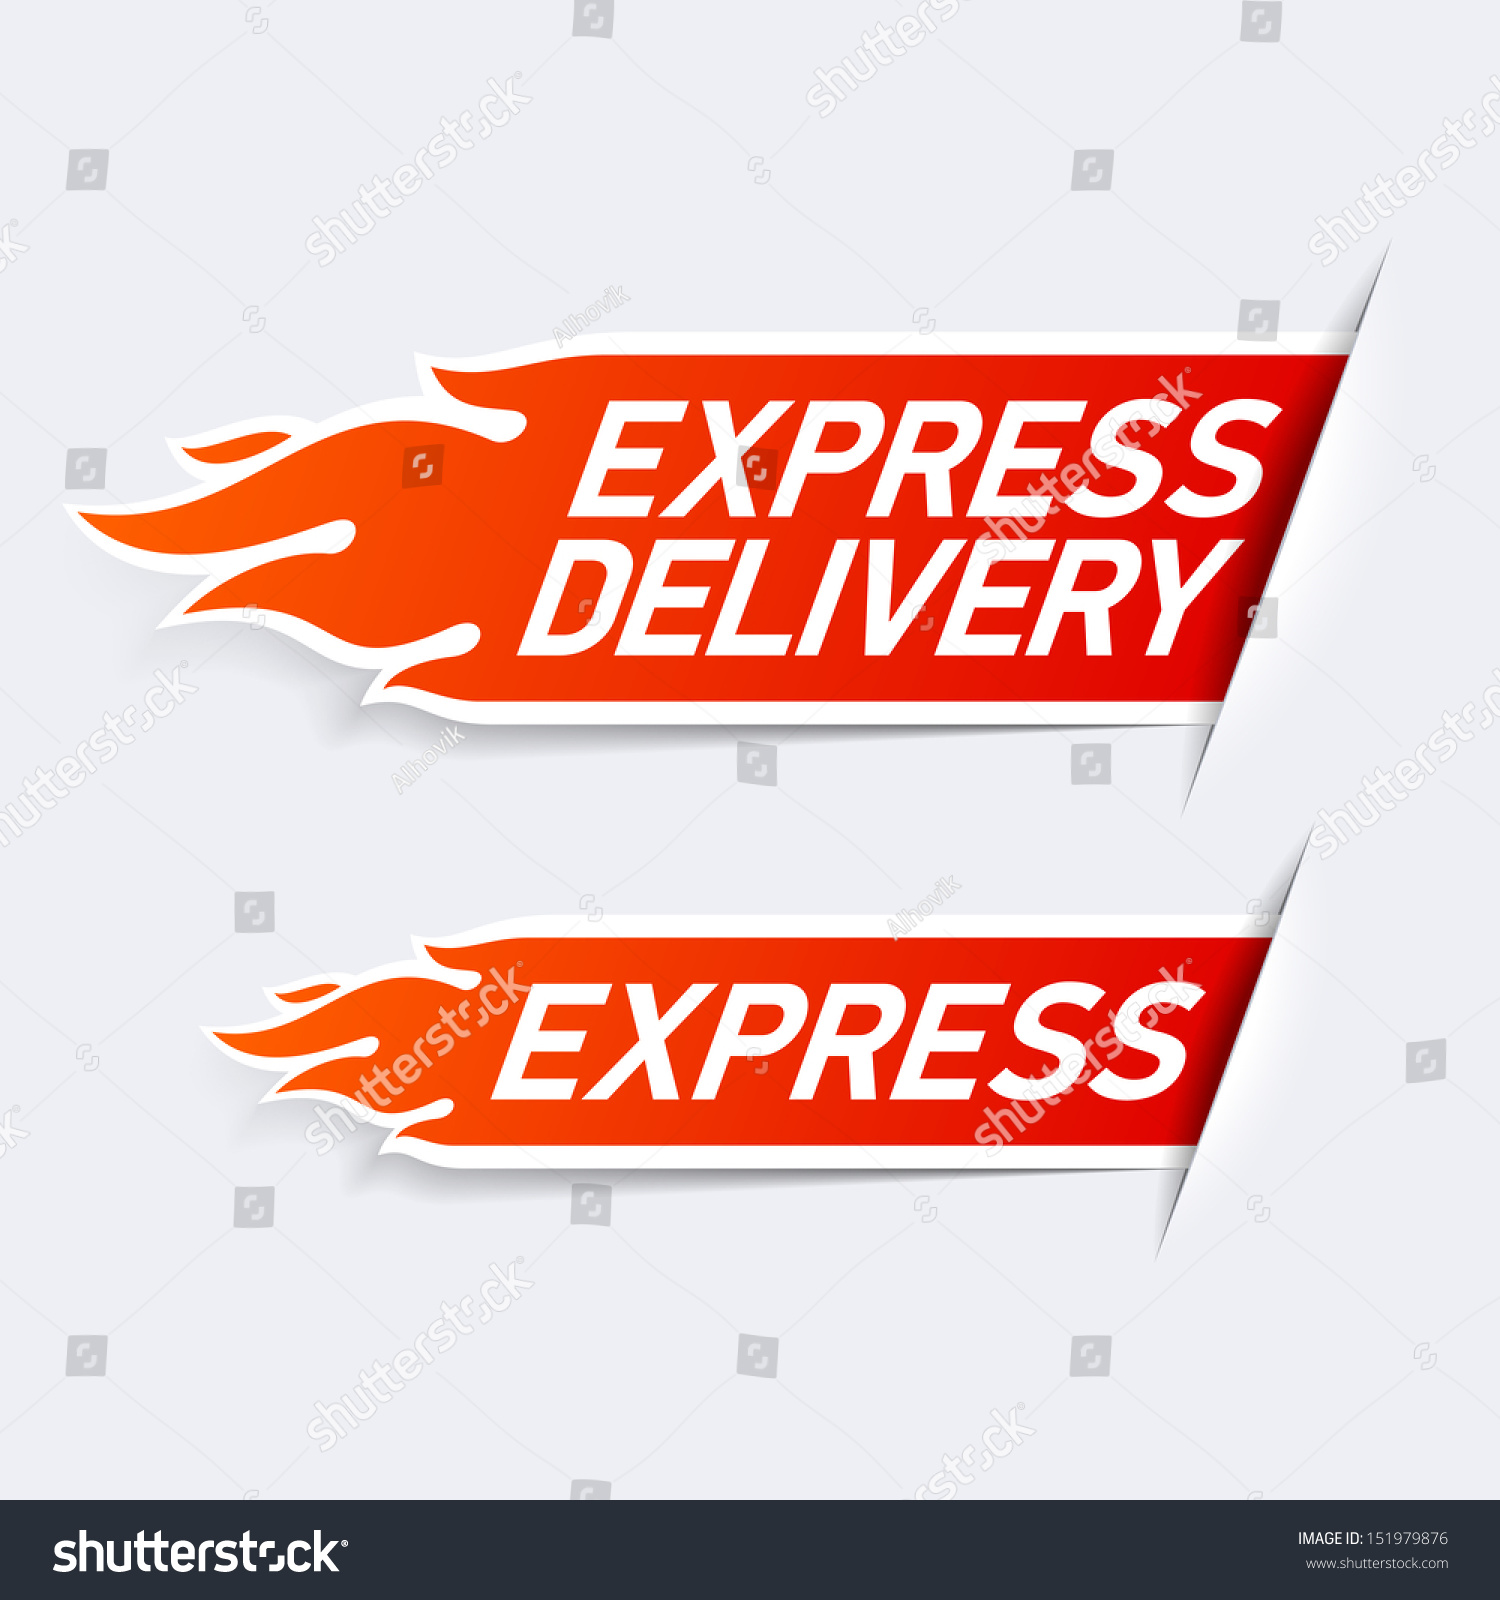 express delivery clipart - photo #2